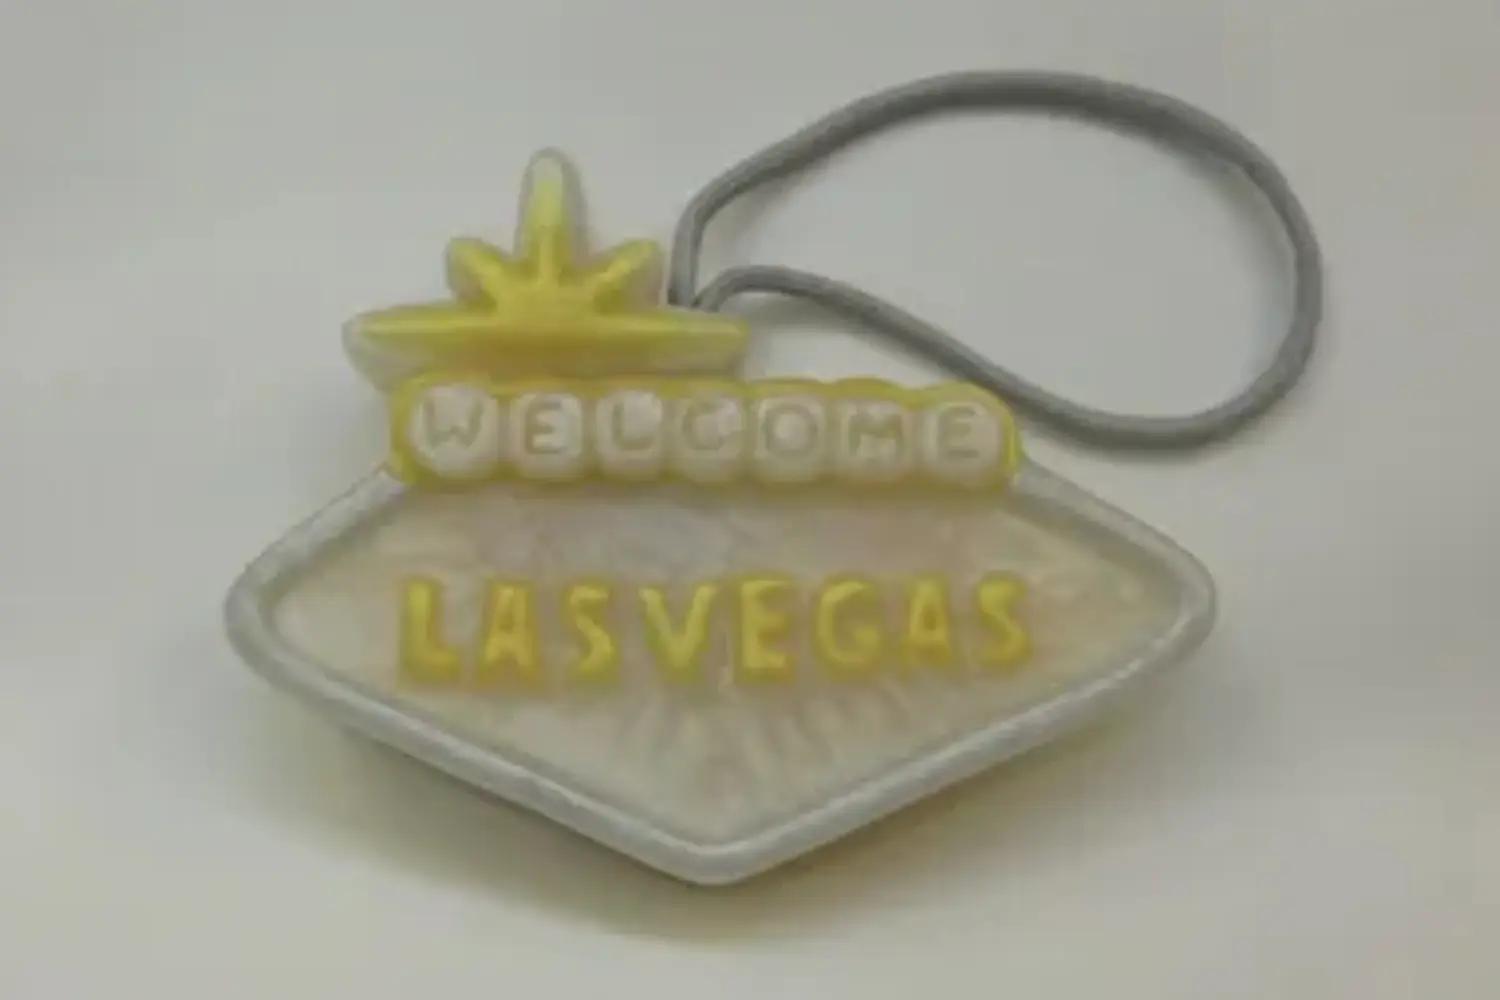 A yellow sign that says " welcome las vegas ".